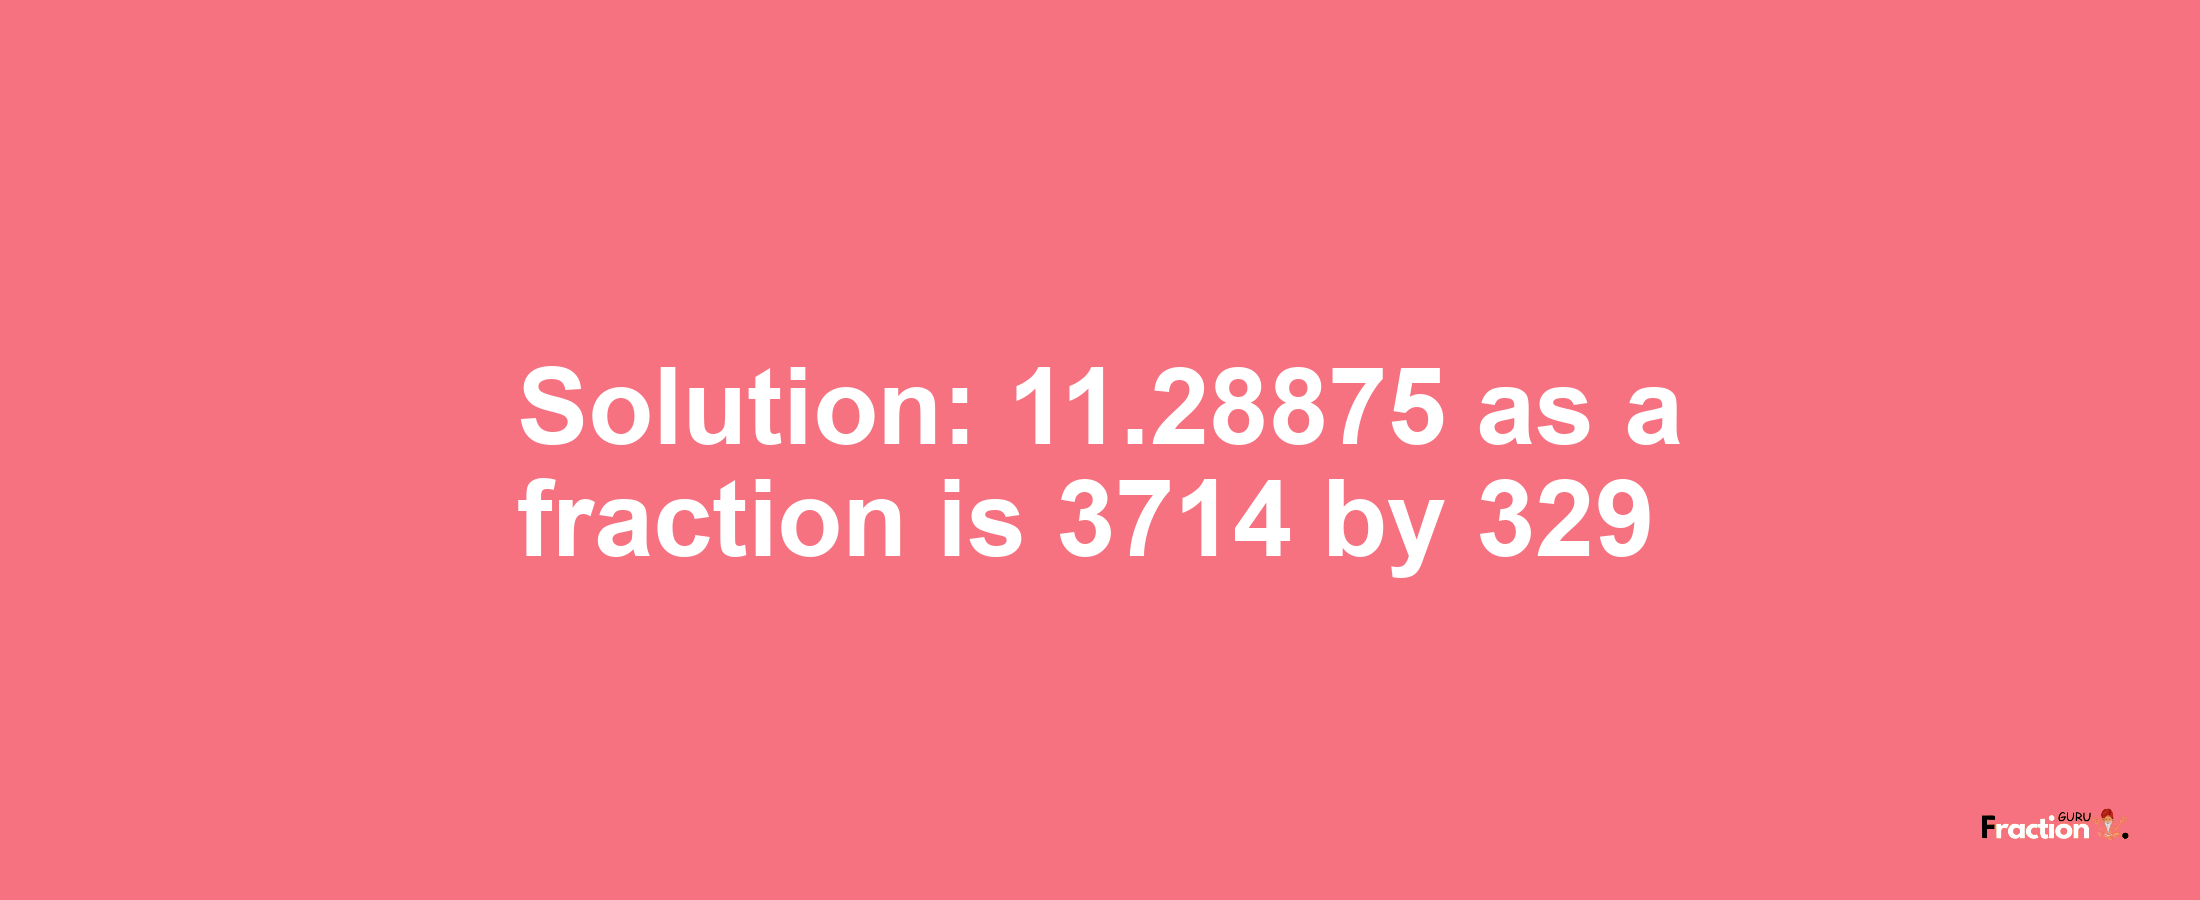 Solution:11.28875 as a fraction is 3714/329